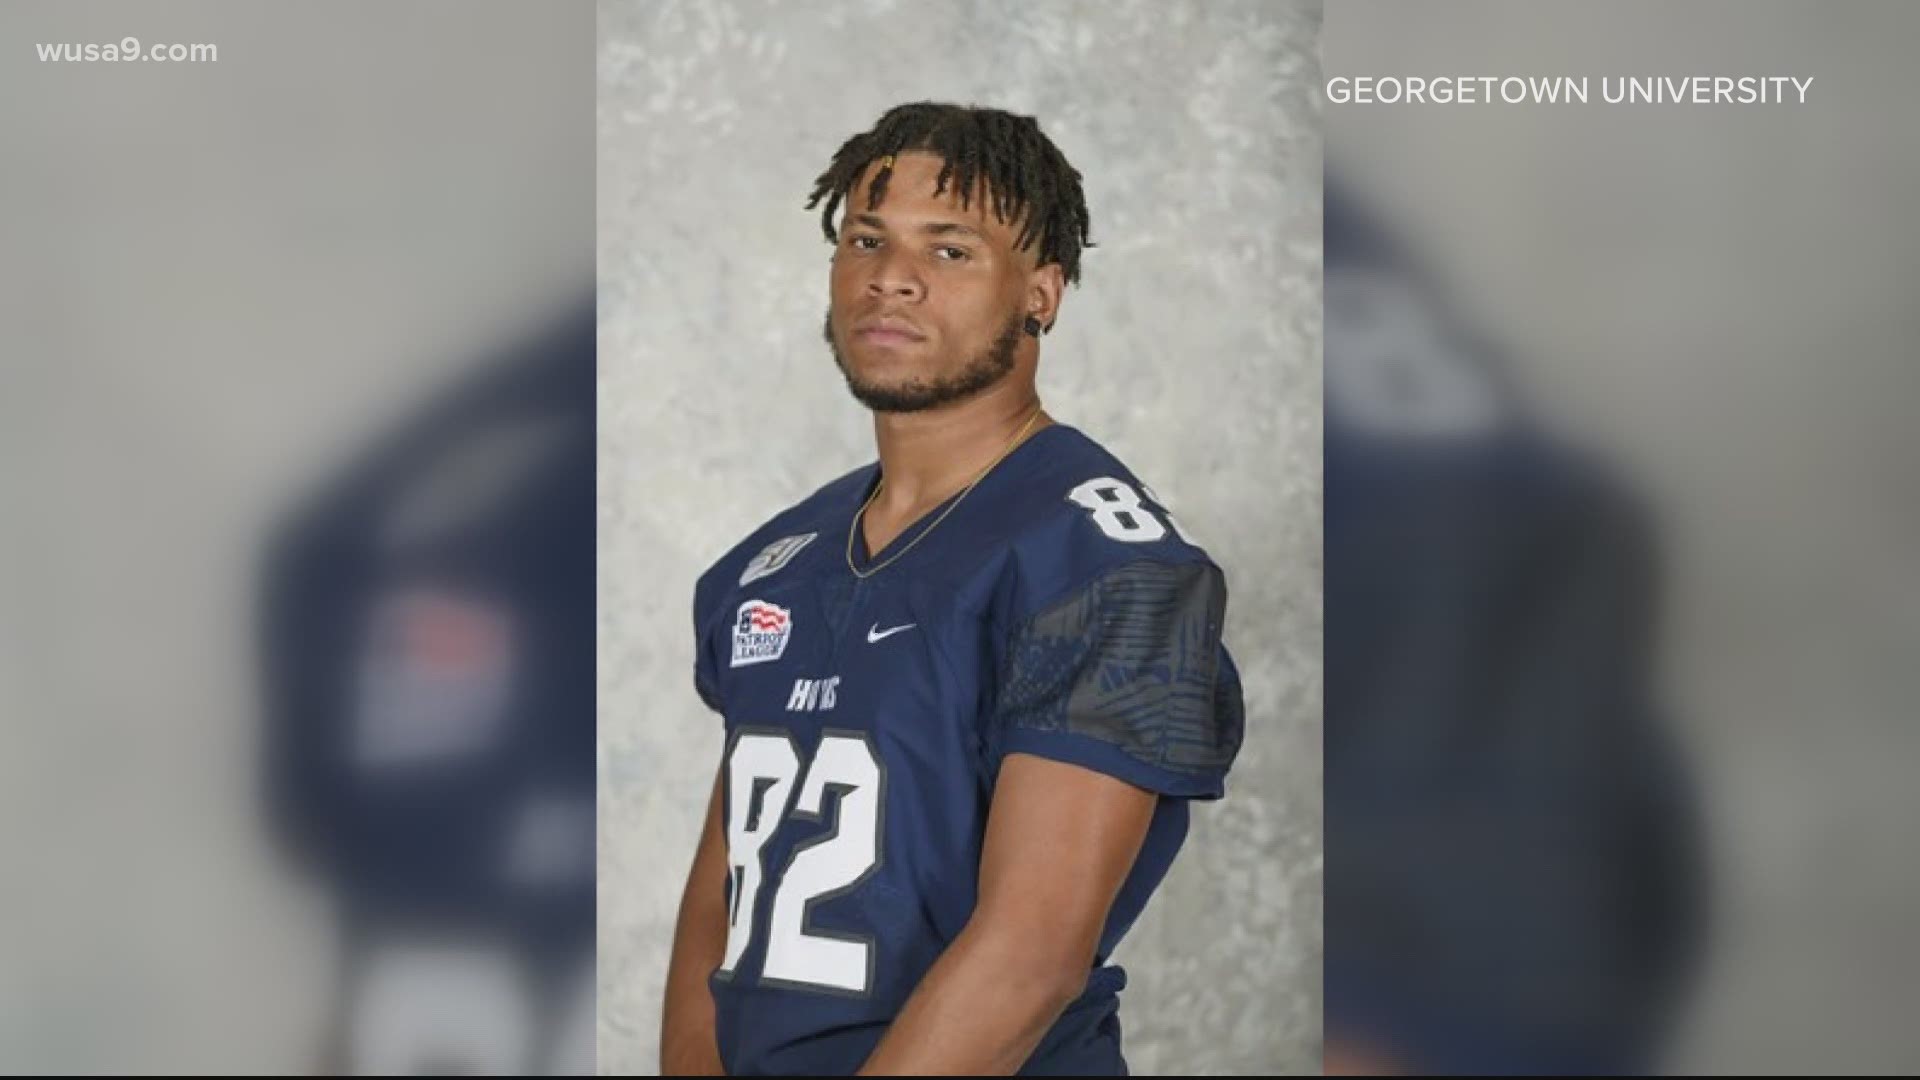 Dijon Williams, a senior wide receiver and Atlanta native, has reportedly been arrested on first-degree murder charges.